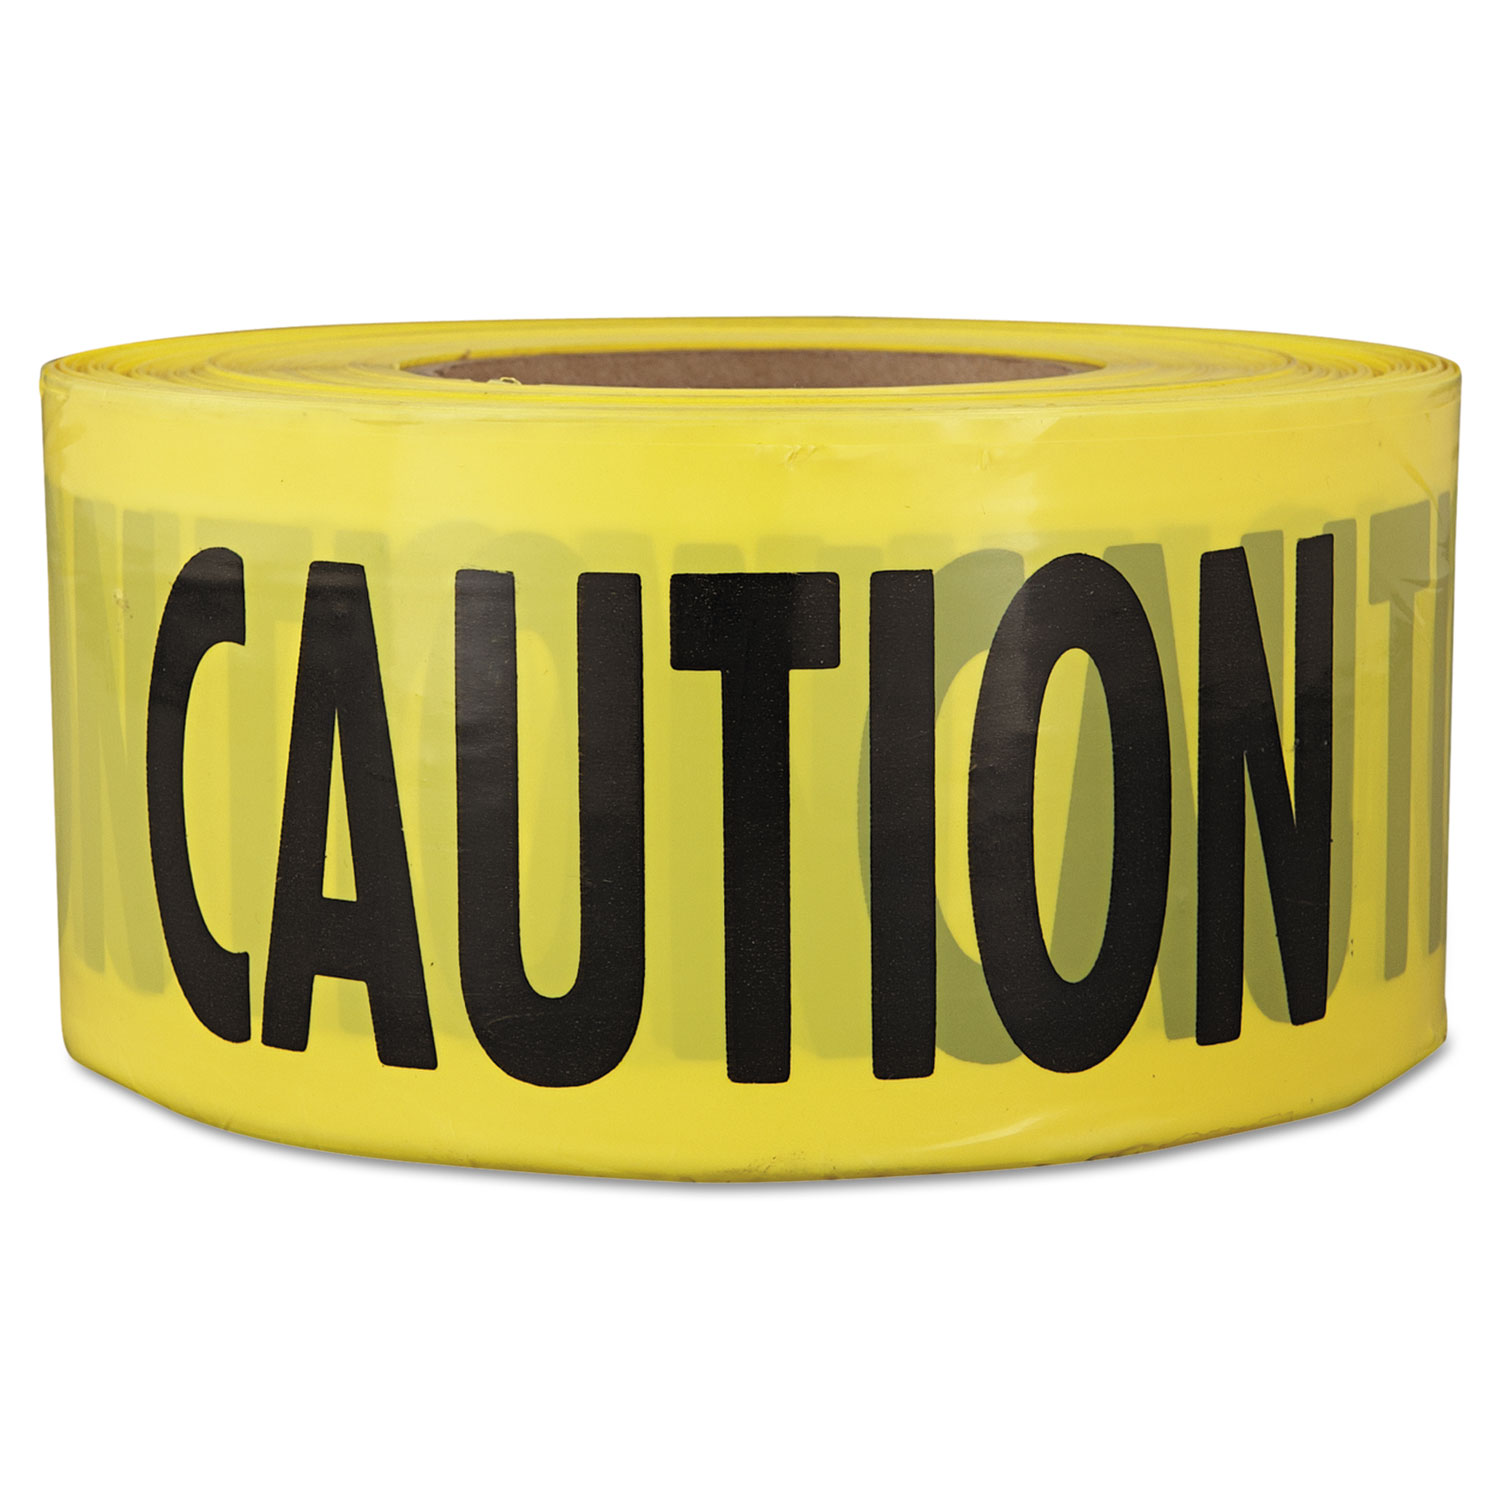 1,000 ft. x 3 in. Caution Barricade Tape (Yellow)